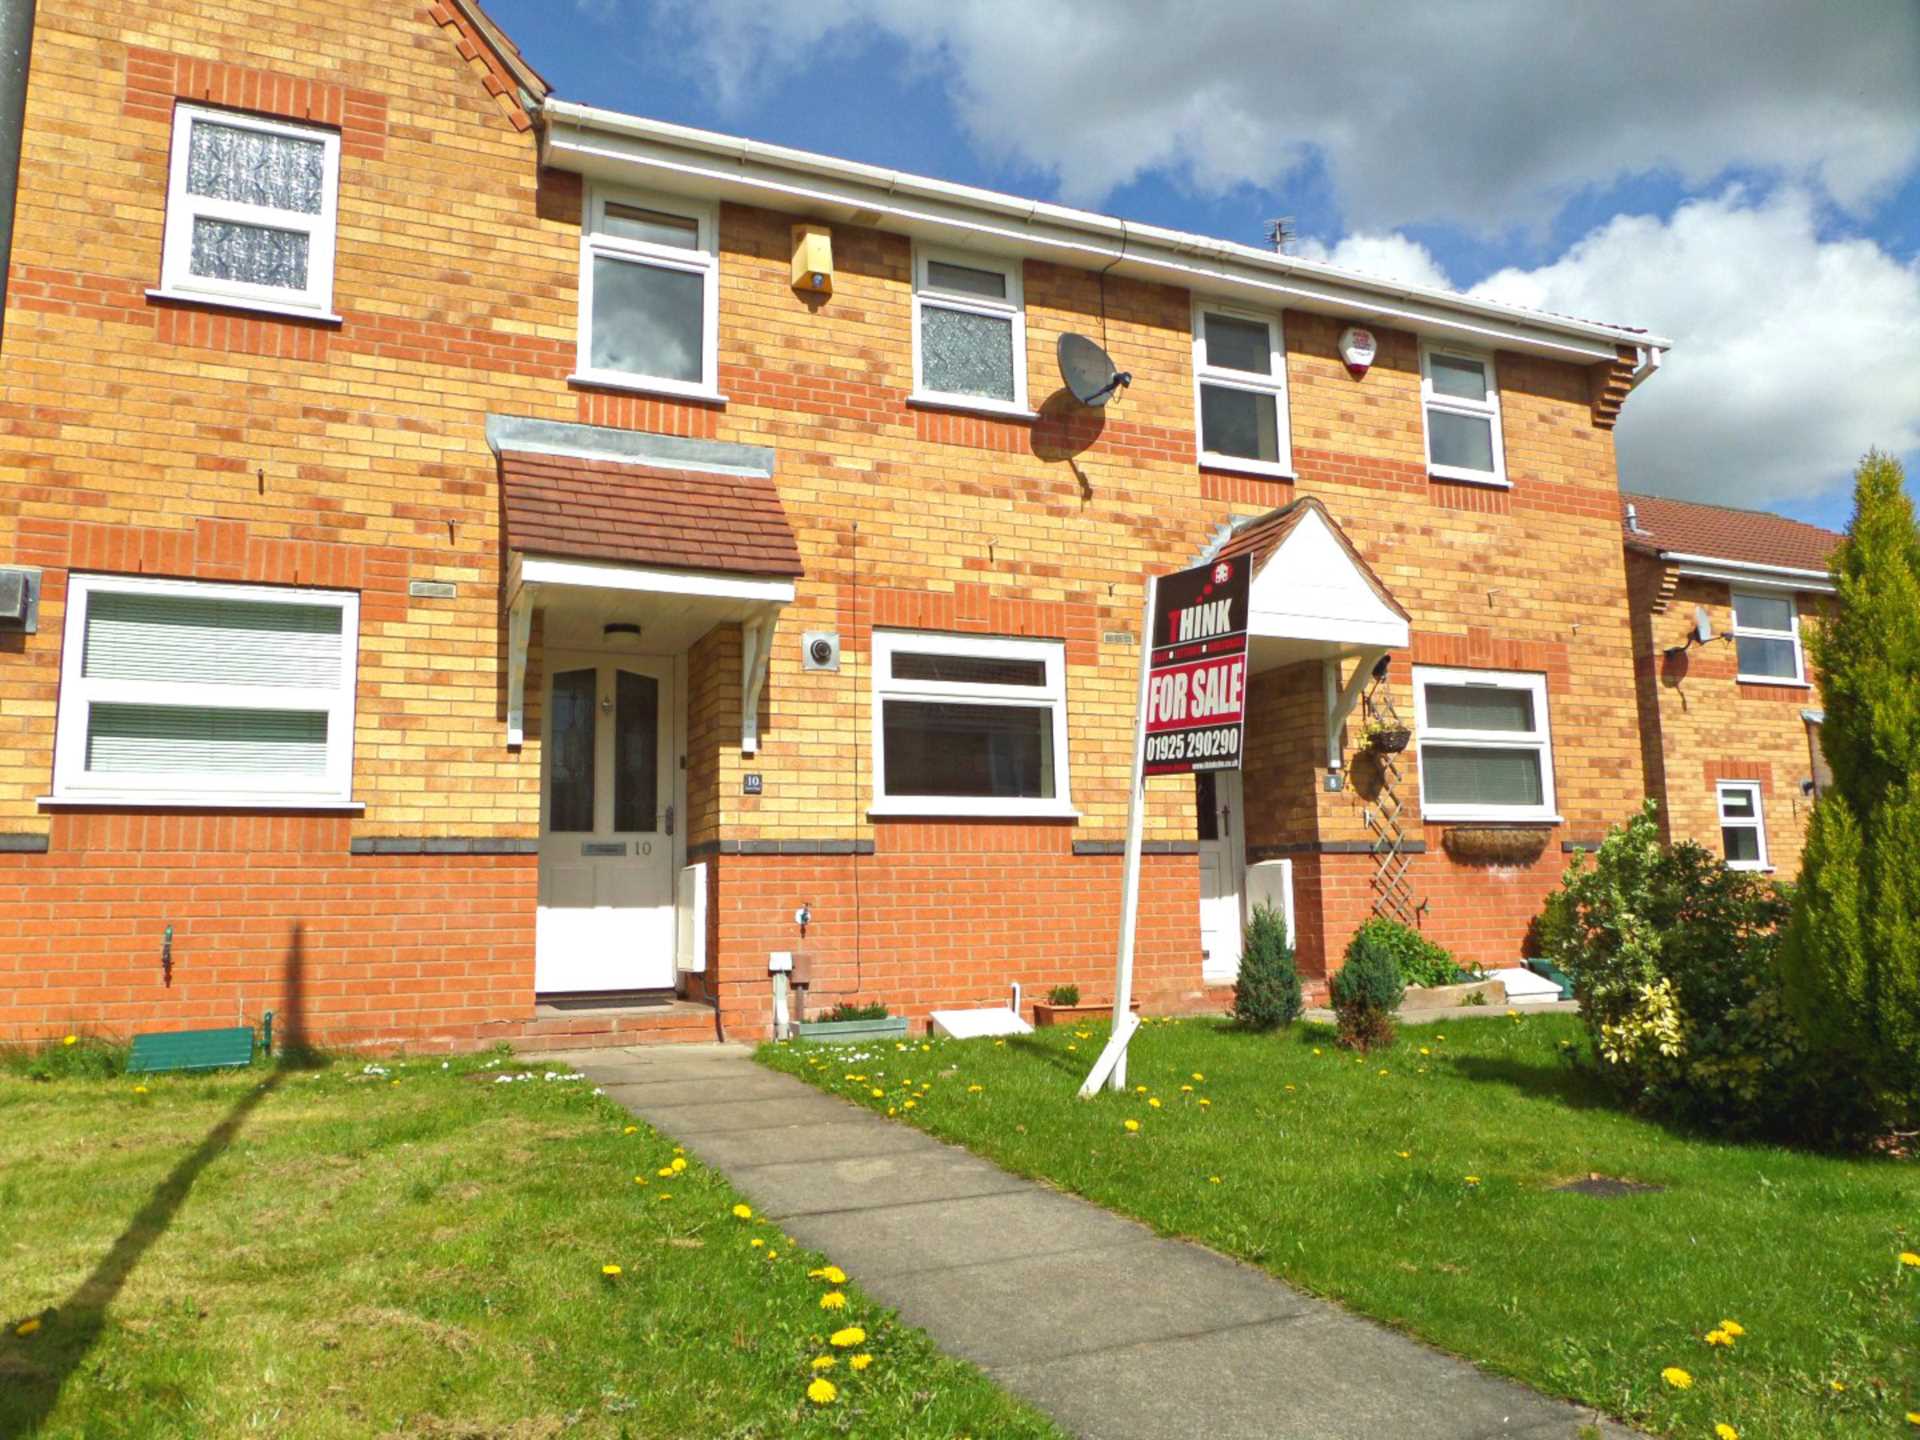 2 bed Semi-Detached House for rent in Newton Le Willows. From Think Sales Lettings Mortgages